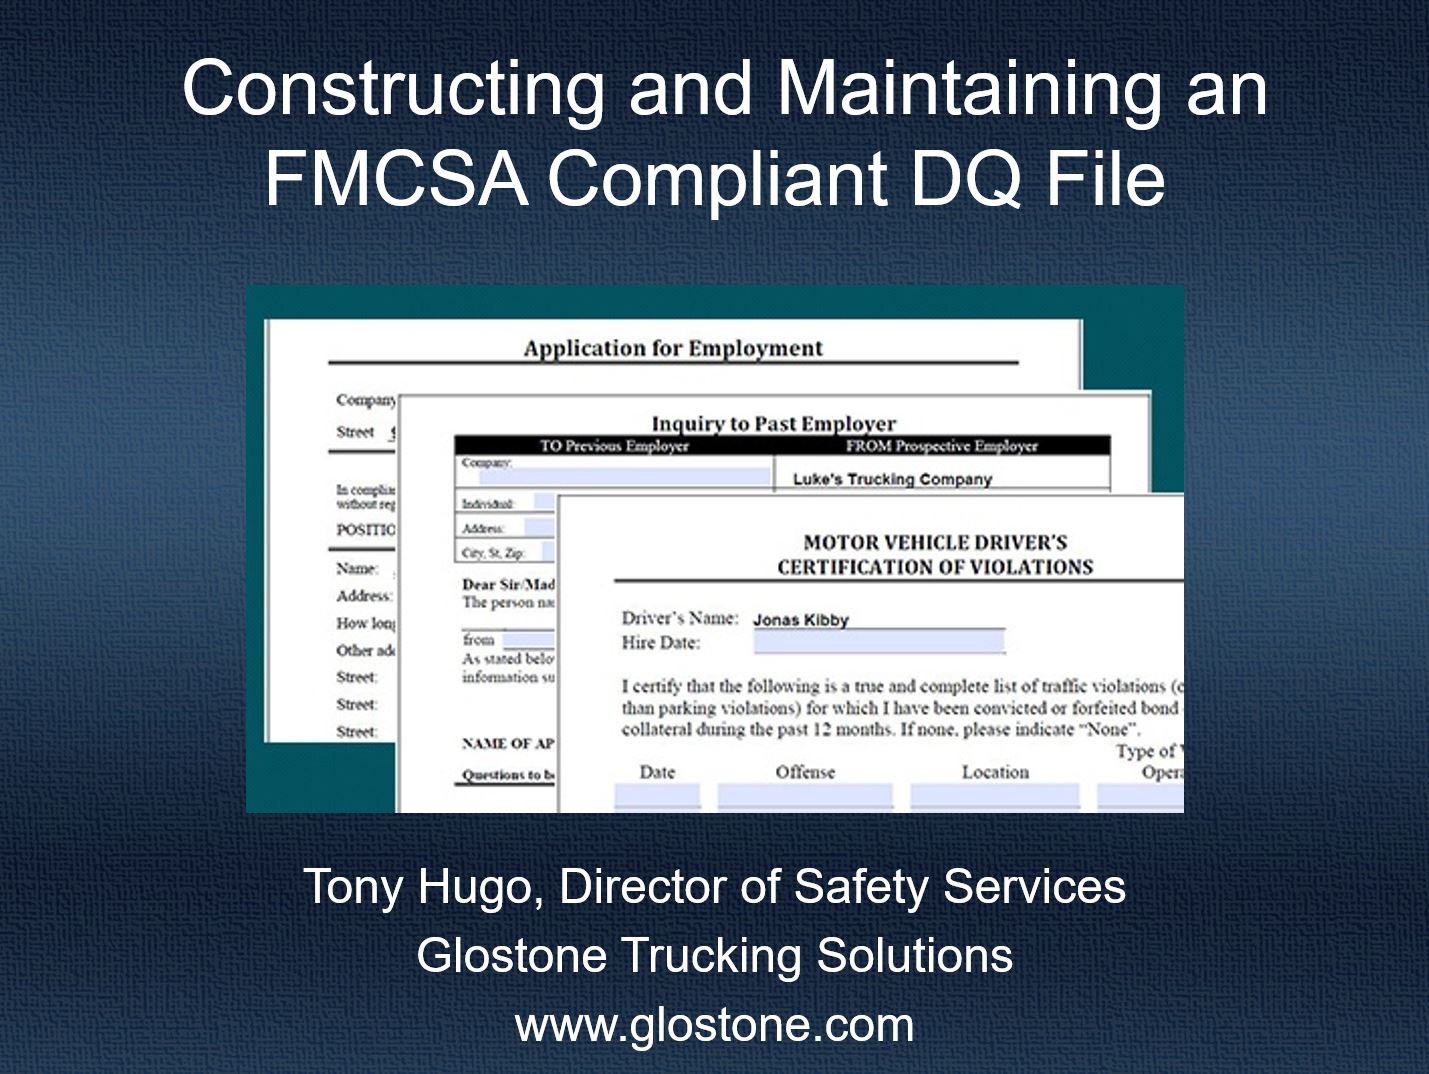 September 2017 webinar: Constructing and Maintaining a FMCSA Compliant Driver Qualification File